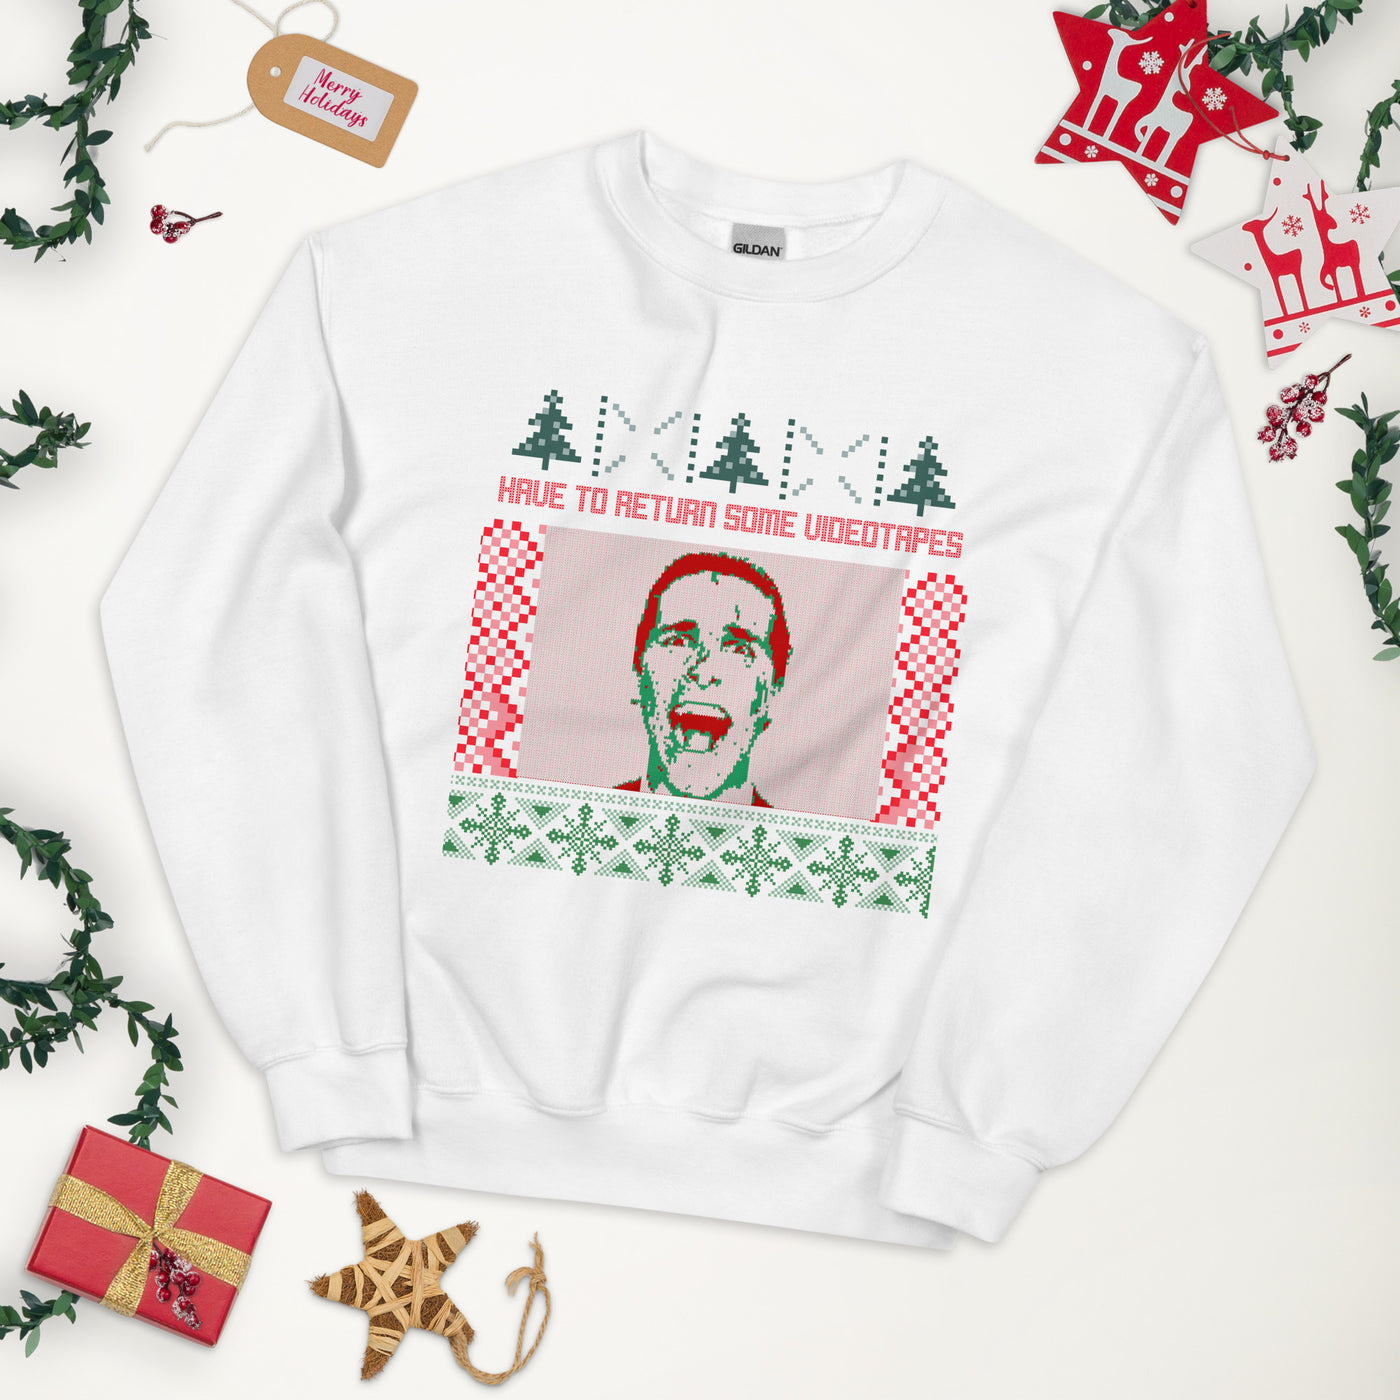 Return some video tapes Christmas Sweater - Arbitrage Andy